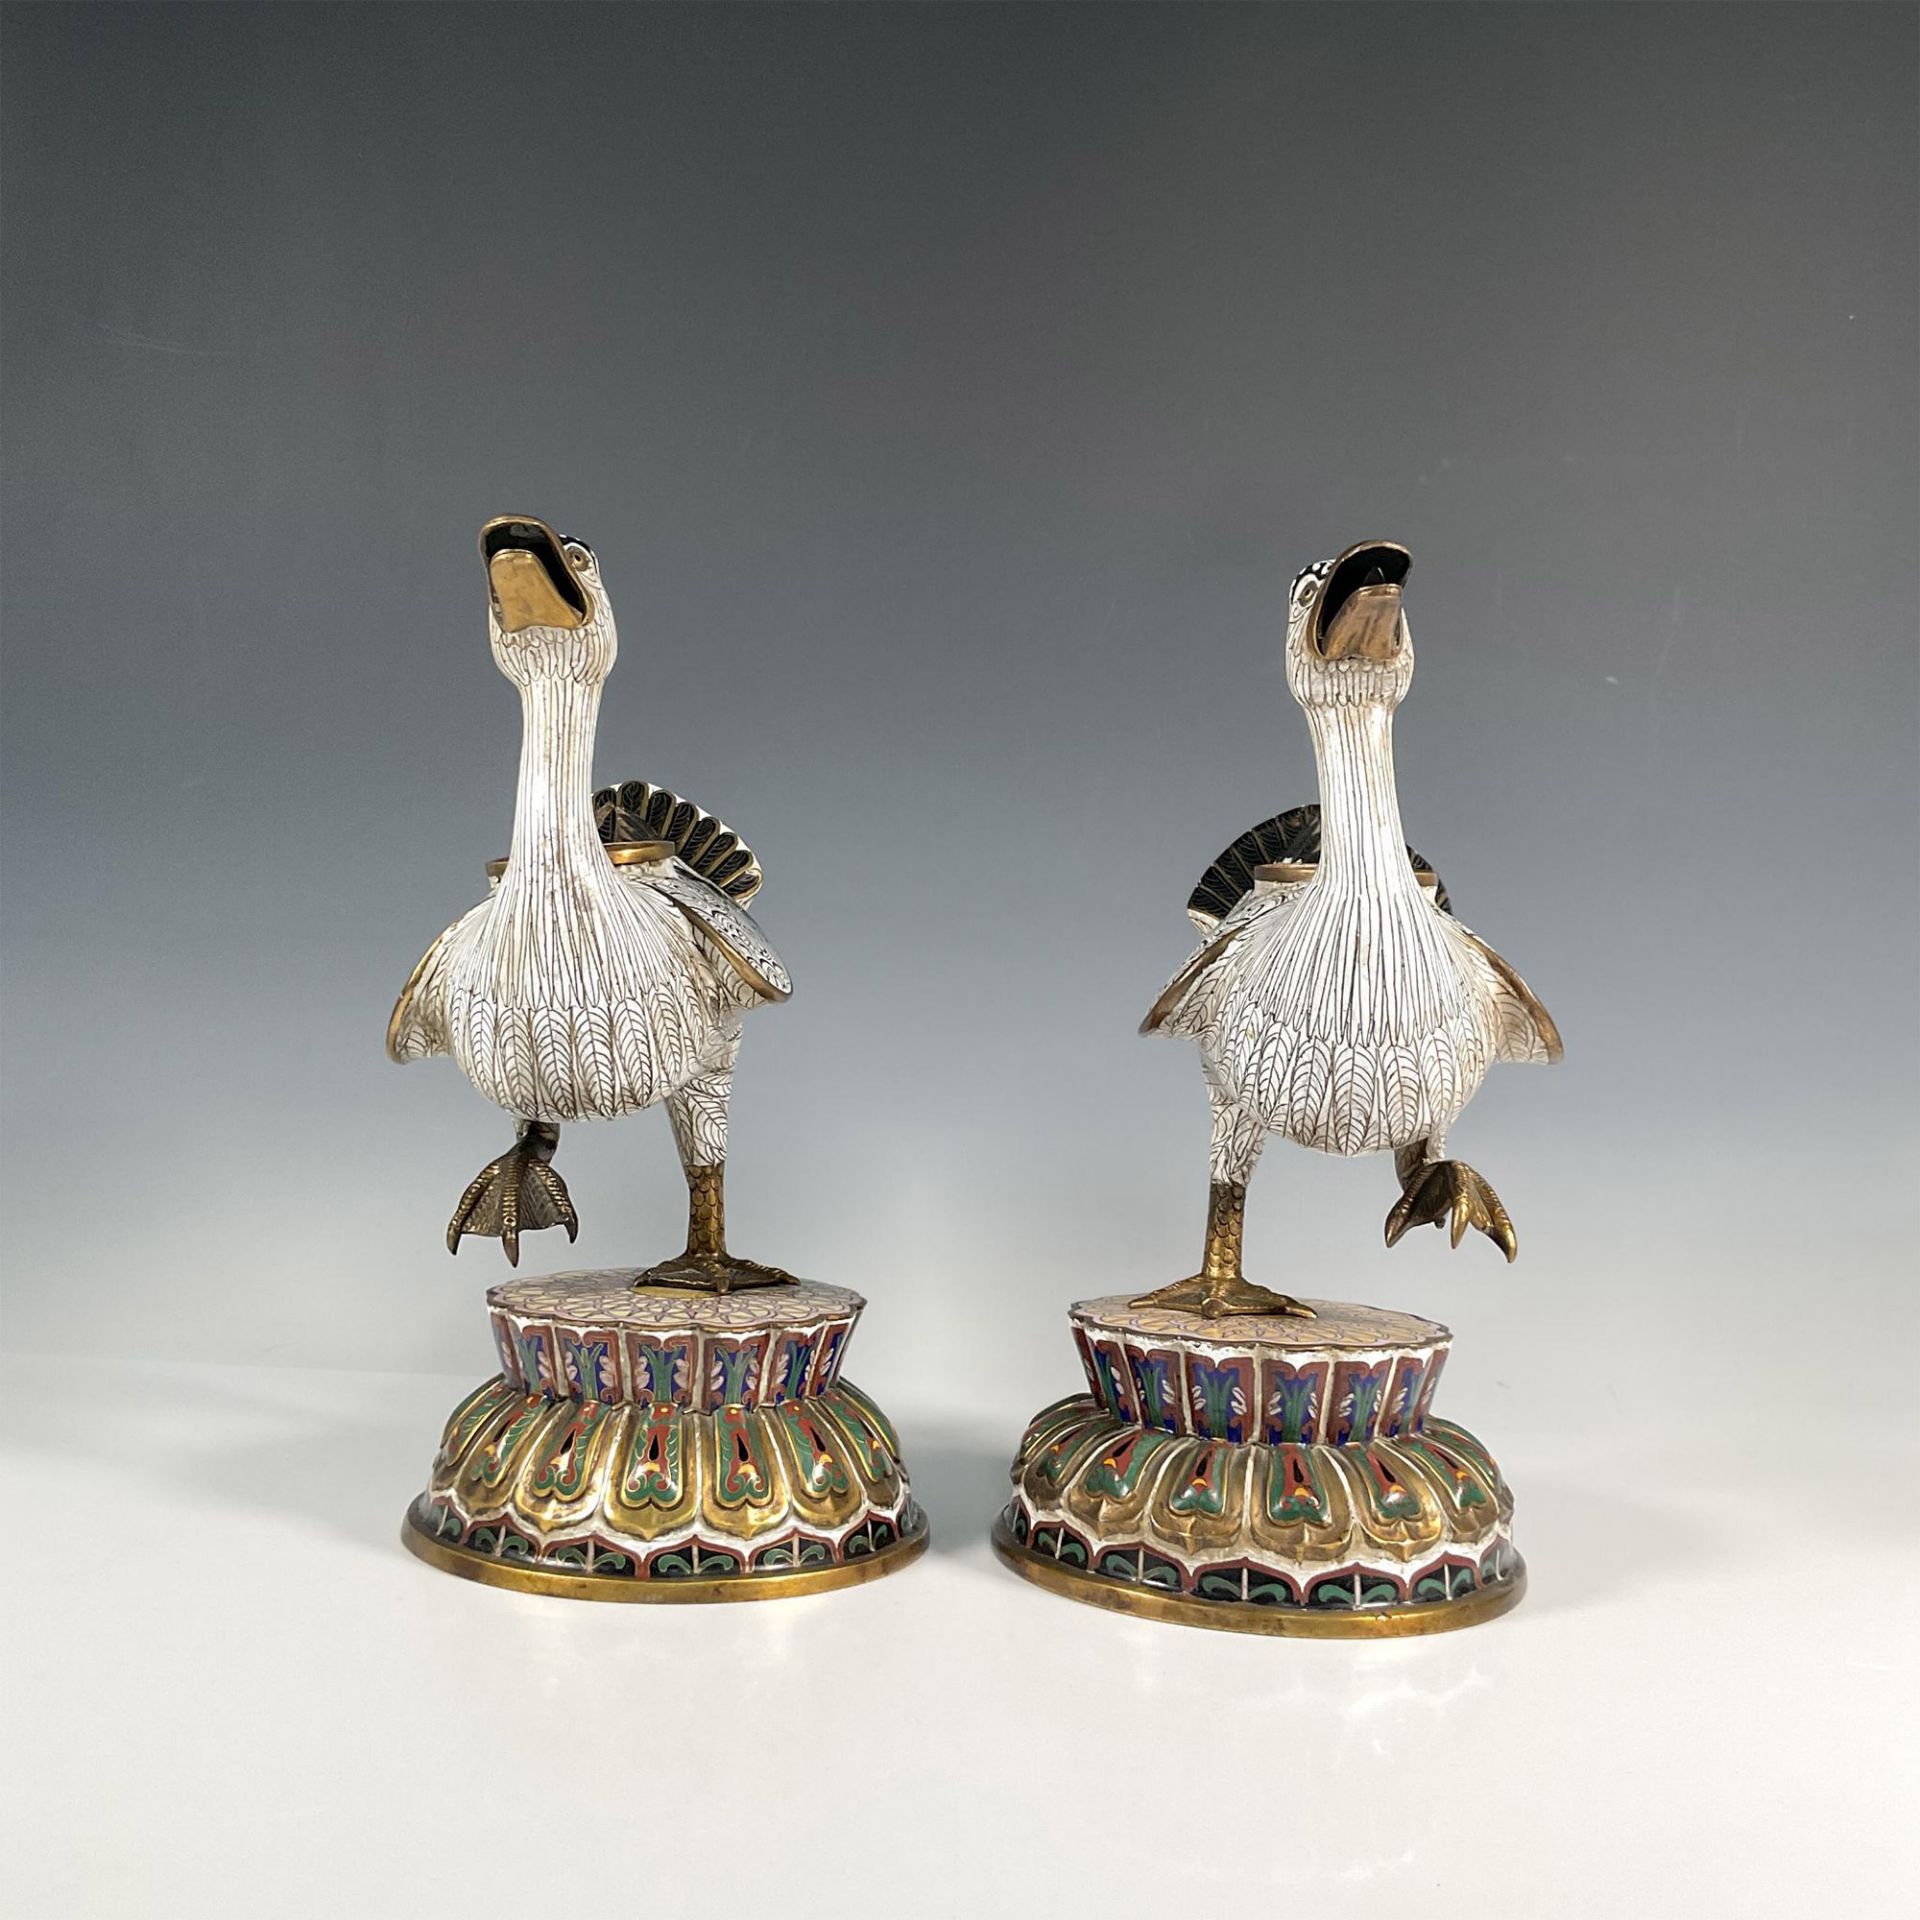 Pair of Chinese Cloisonne Duck Censers - Image 6 of 11